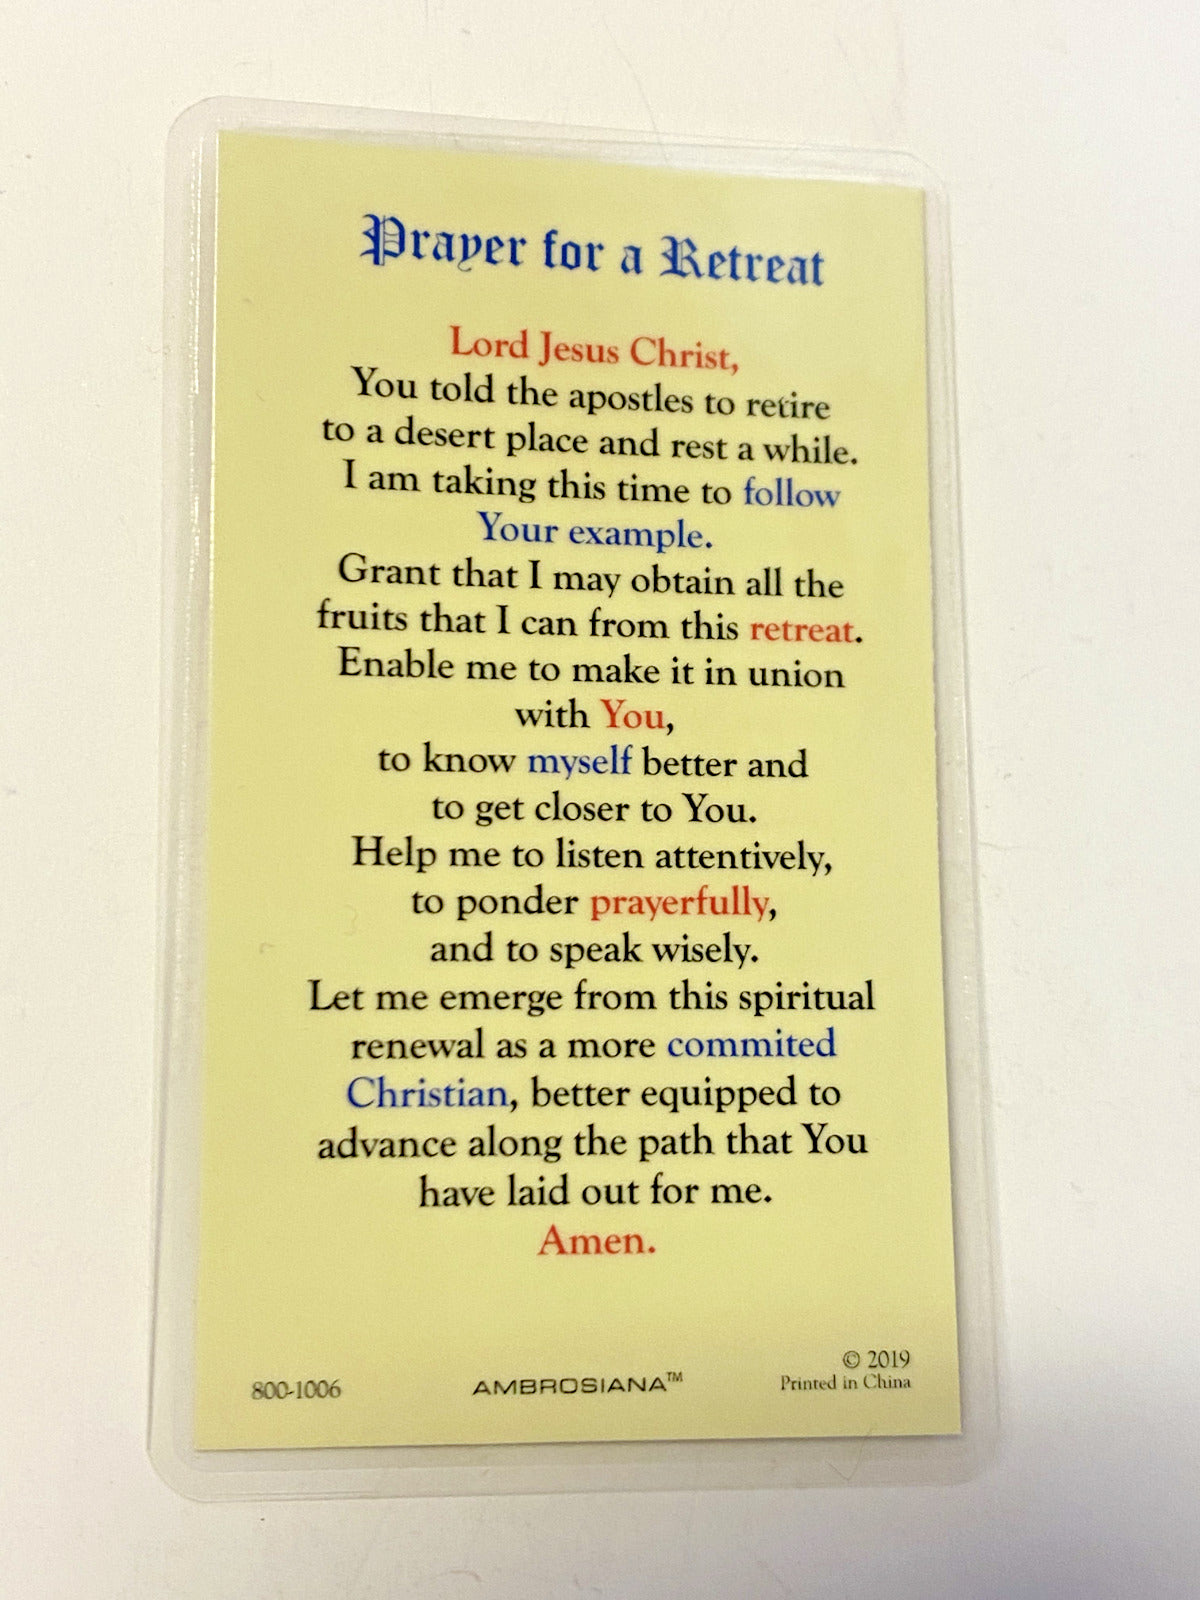 Jesus Christ/"The Power of Prayer " Laminated Prayer Card, New - Bob and Penny Lord